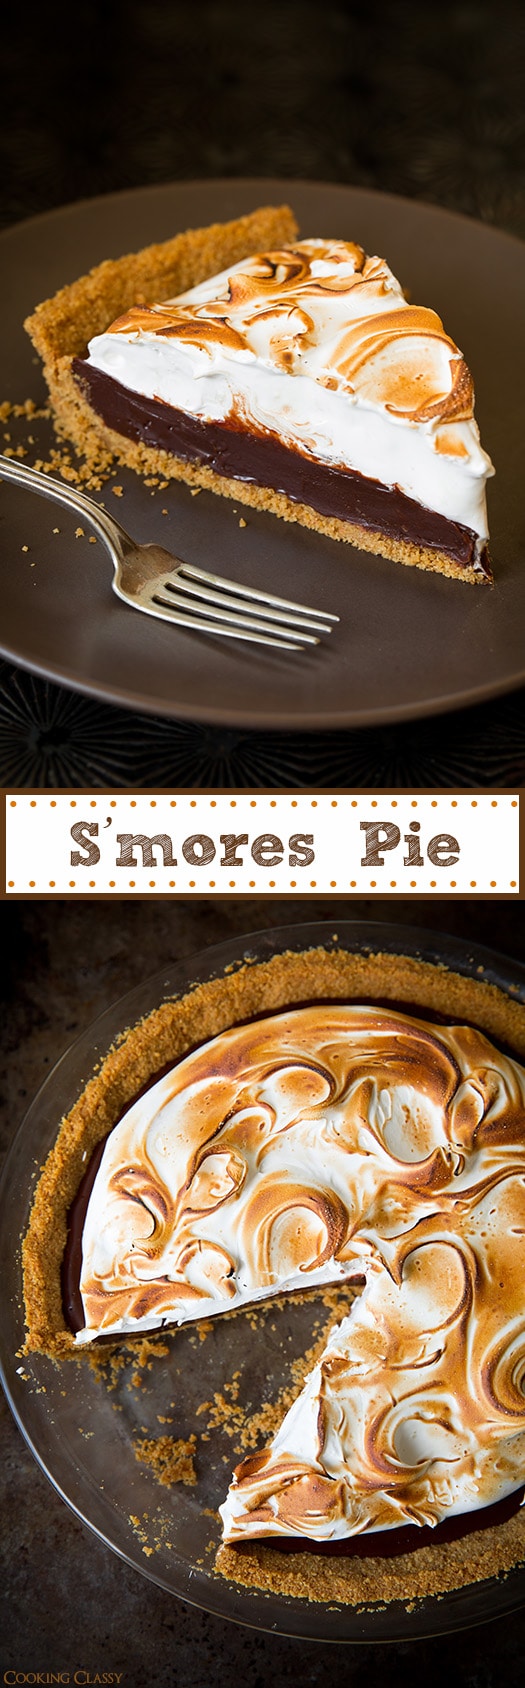 S'mores Pie | Cooking Classy